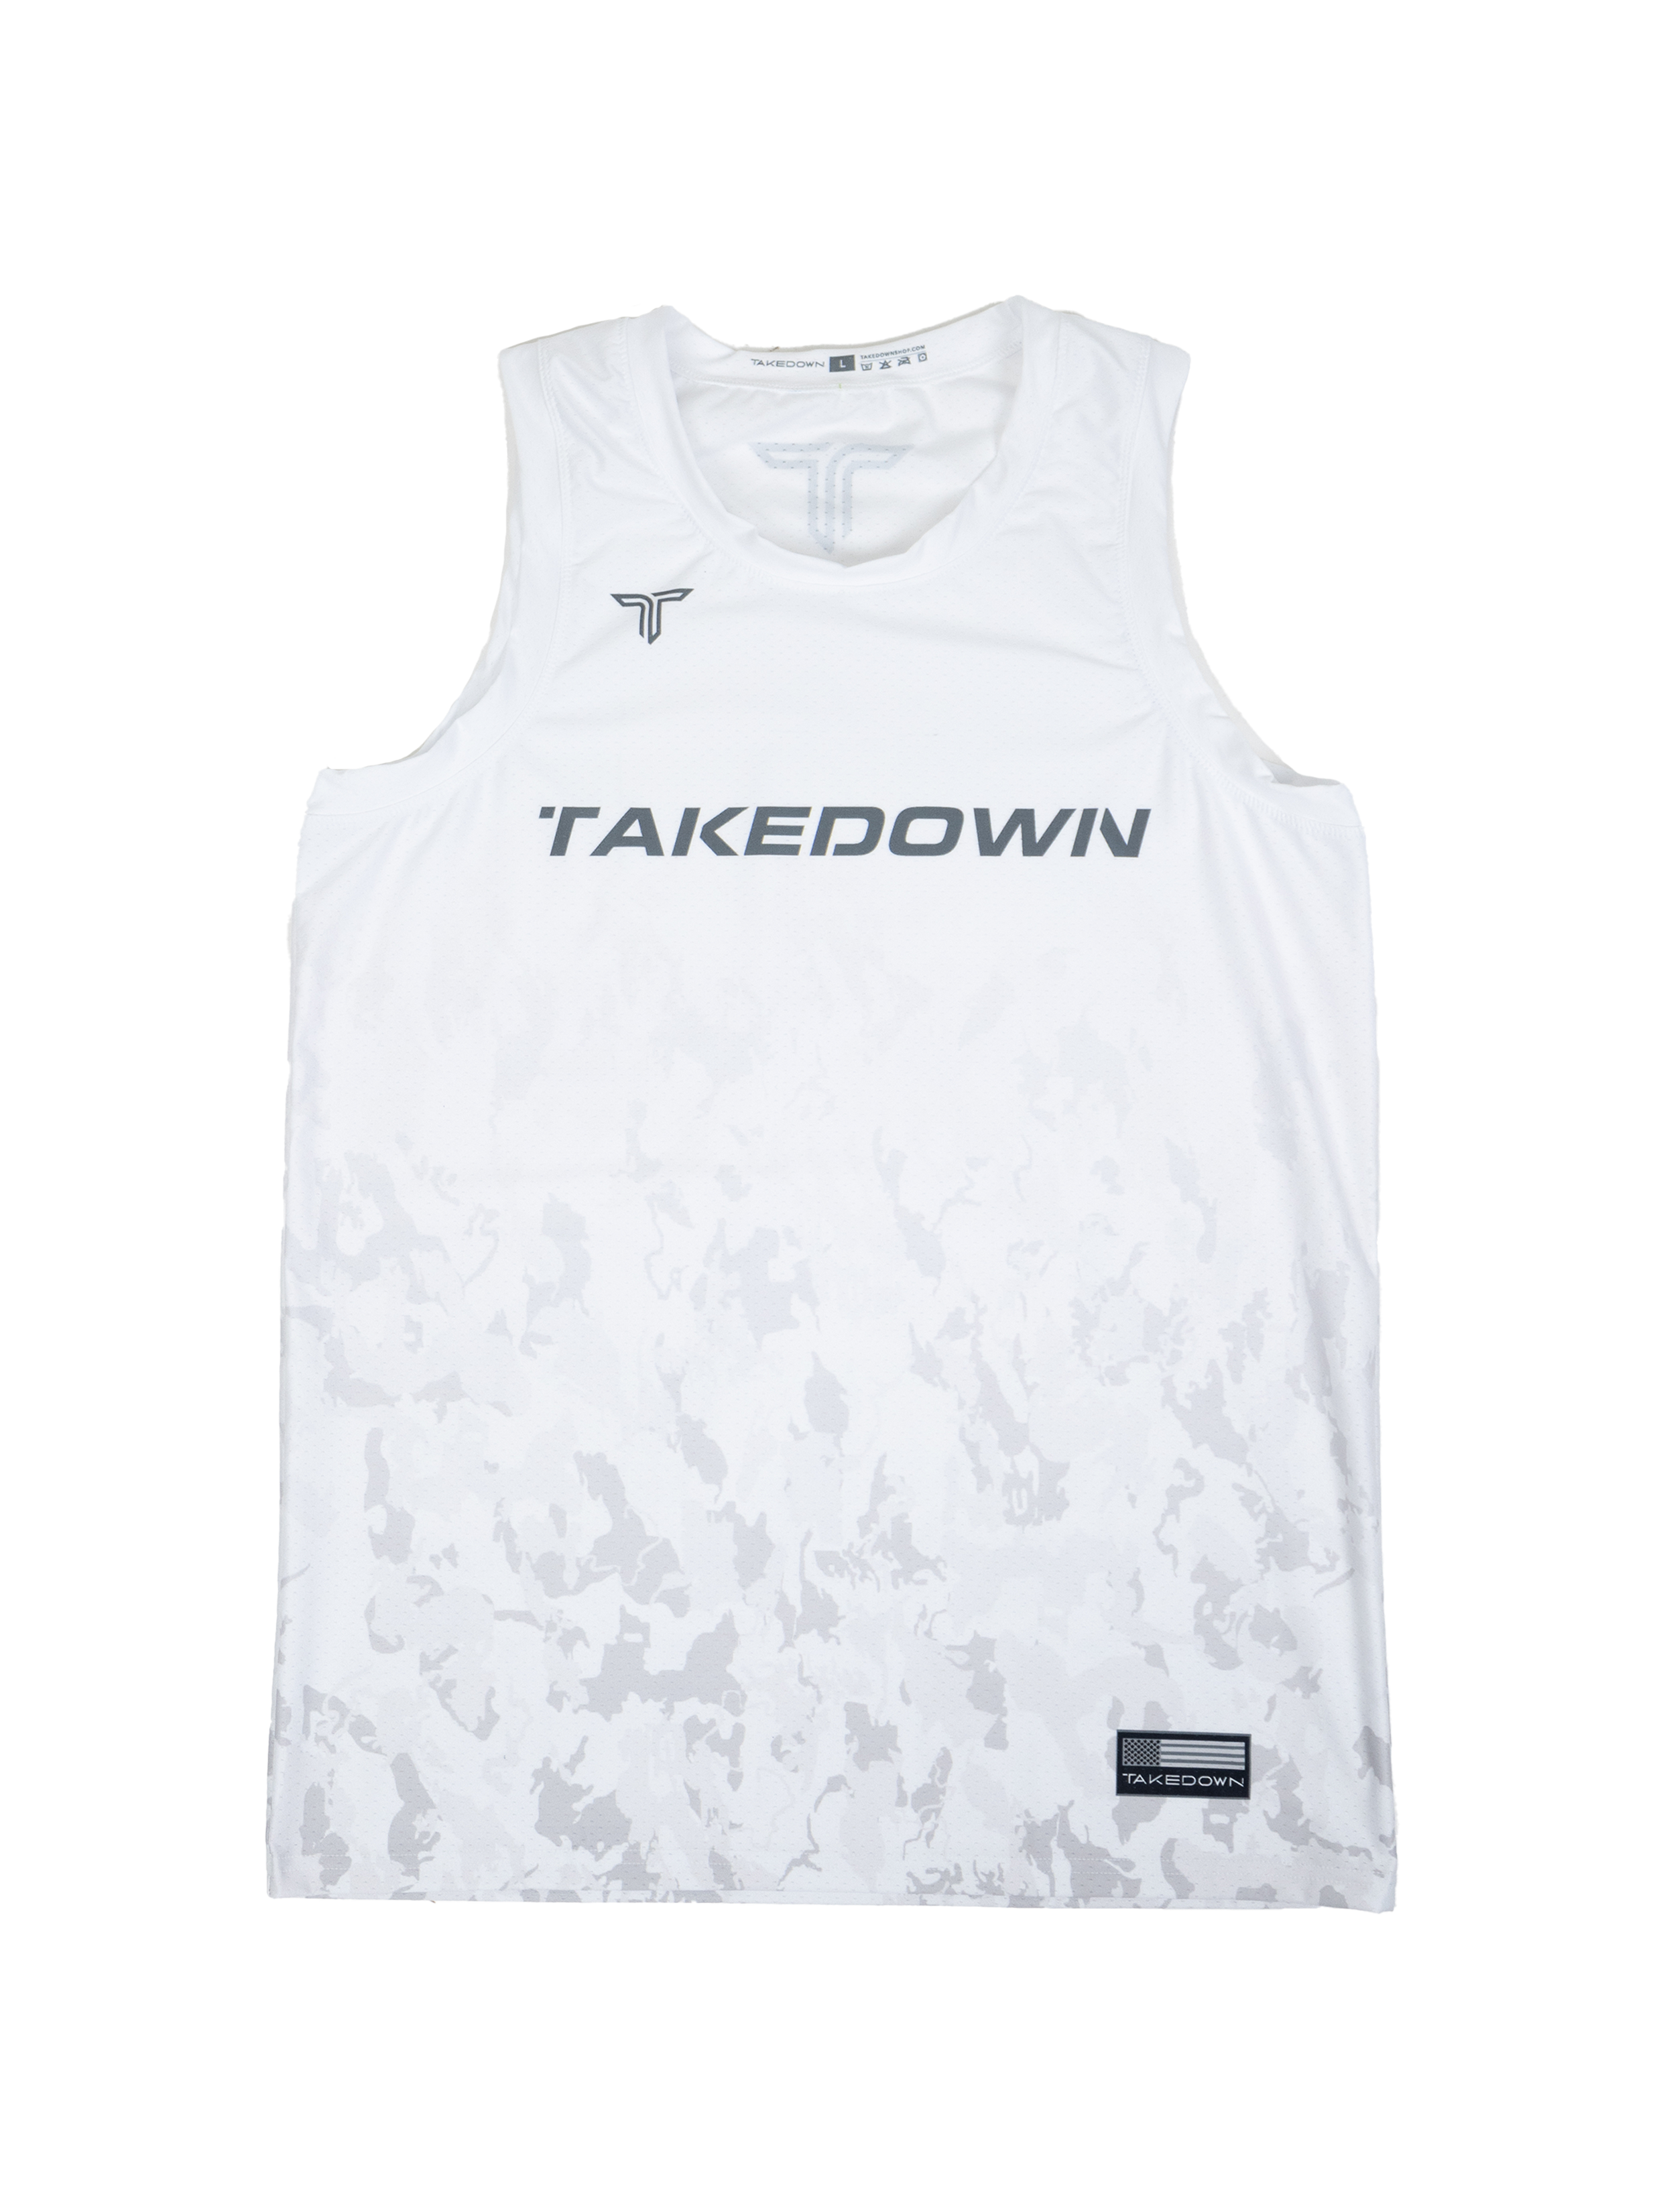 Particle Camo Sleeveless Jersey - Ghost Grey